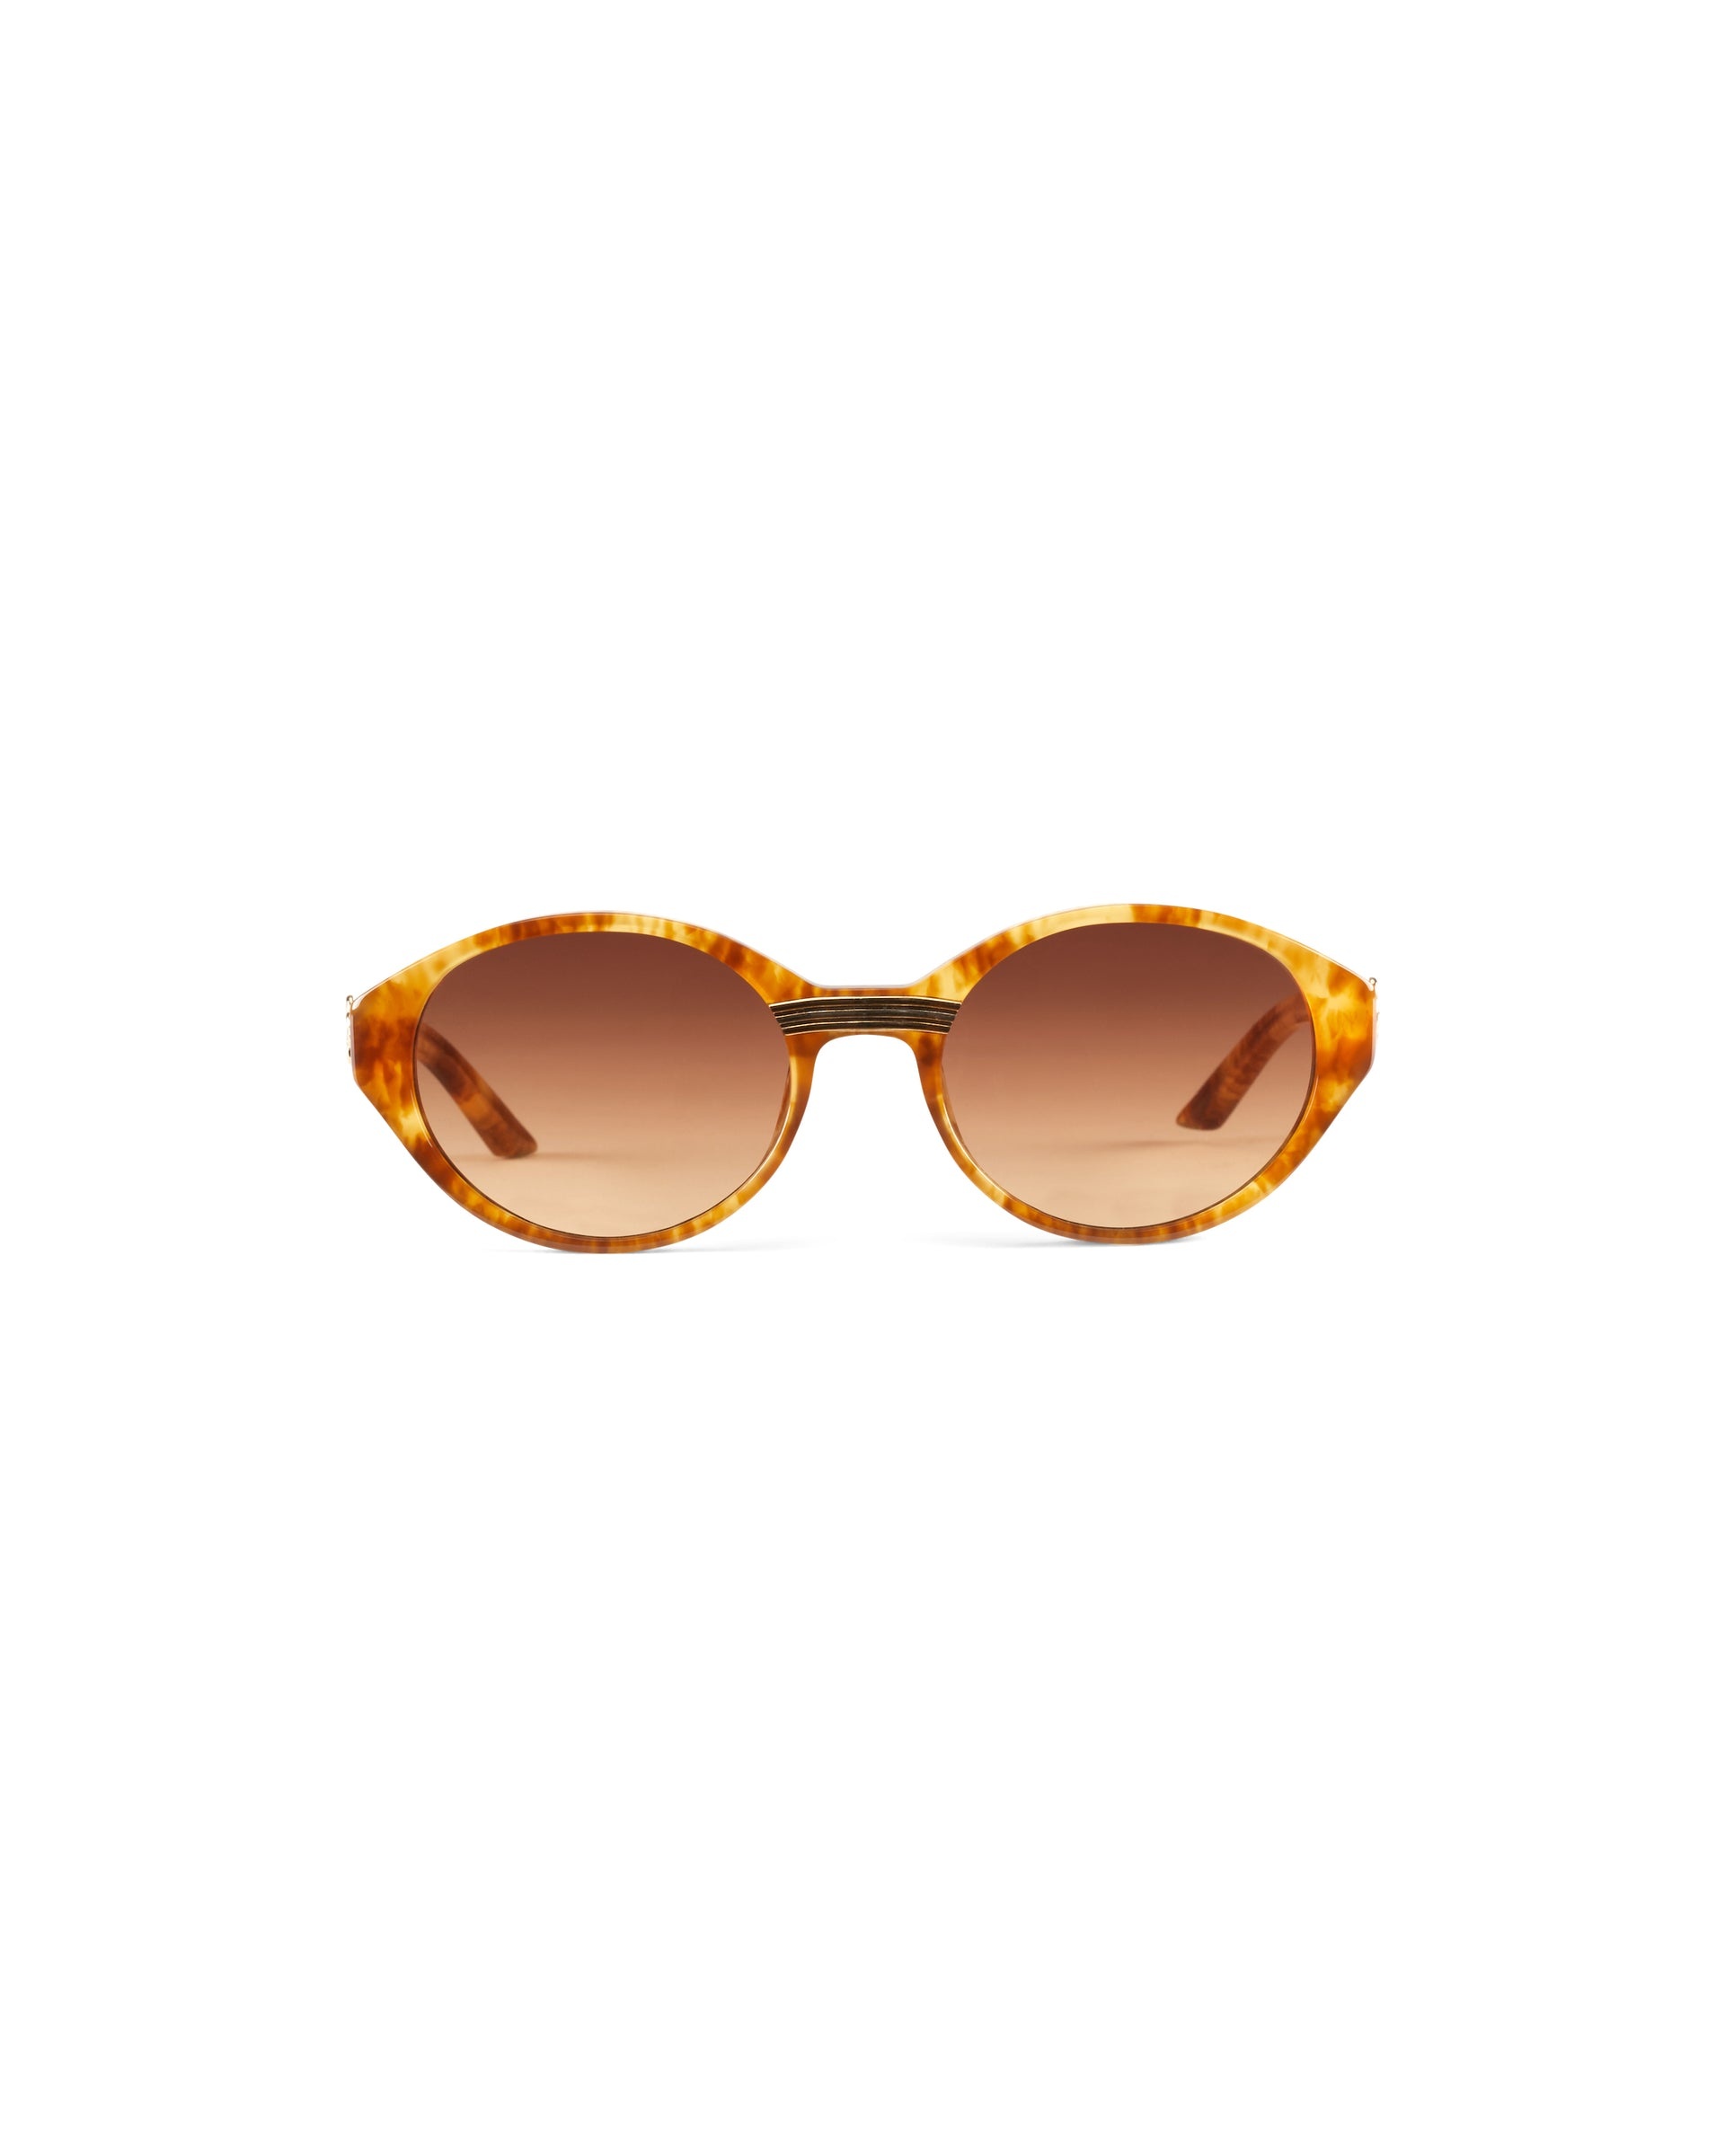 Gold & Brown Cannes Sunglasses - 2